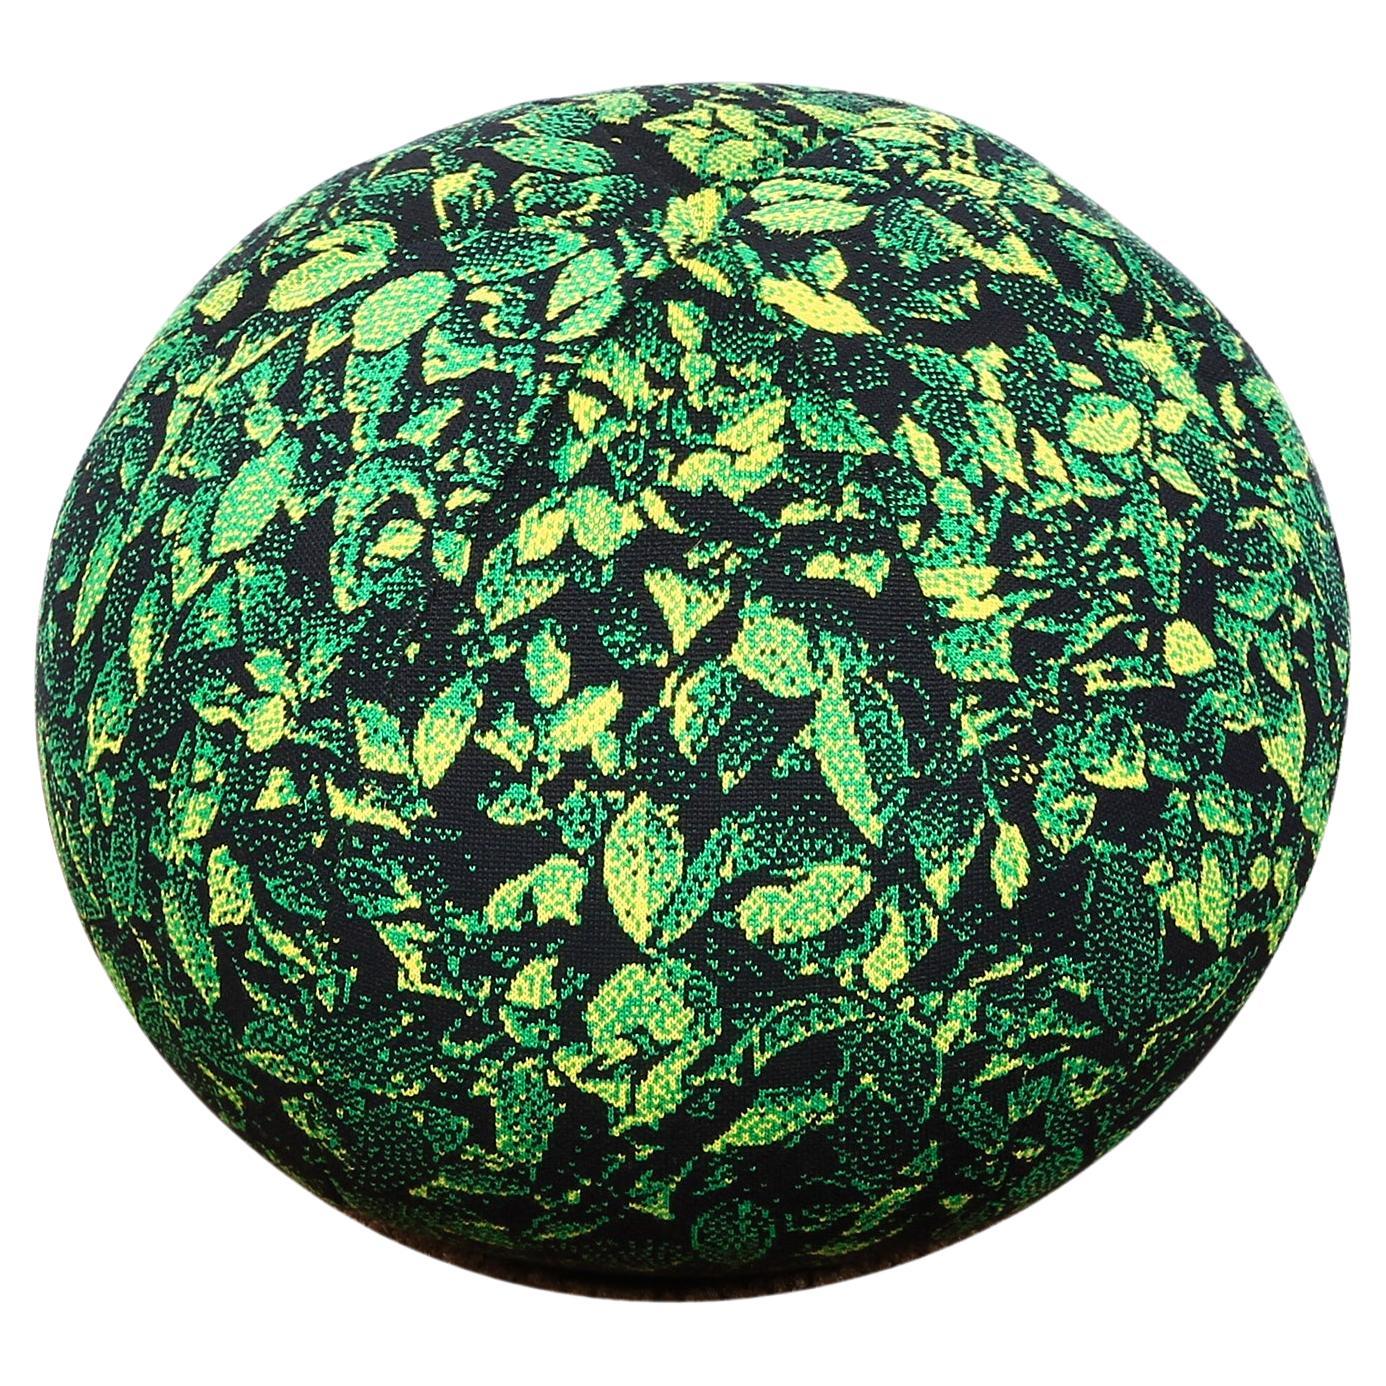 Topiary Ball - Ficus  knitted pixeled pillow medium - Textile - Pillows
Ficus Shape Pillow, meticulously crafted to resemble Ficus. The intricate graphics on this pillow are not merely printed but knitted, showcasing a palette of five different